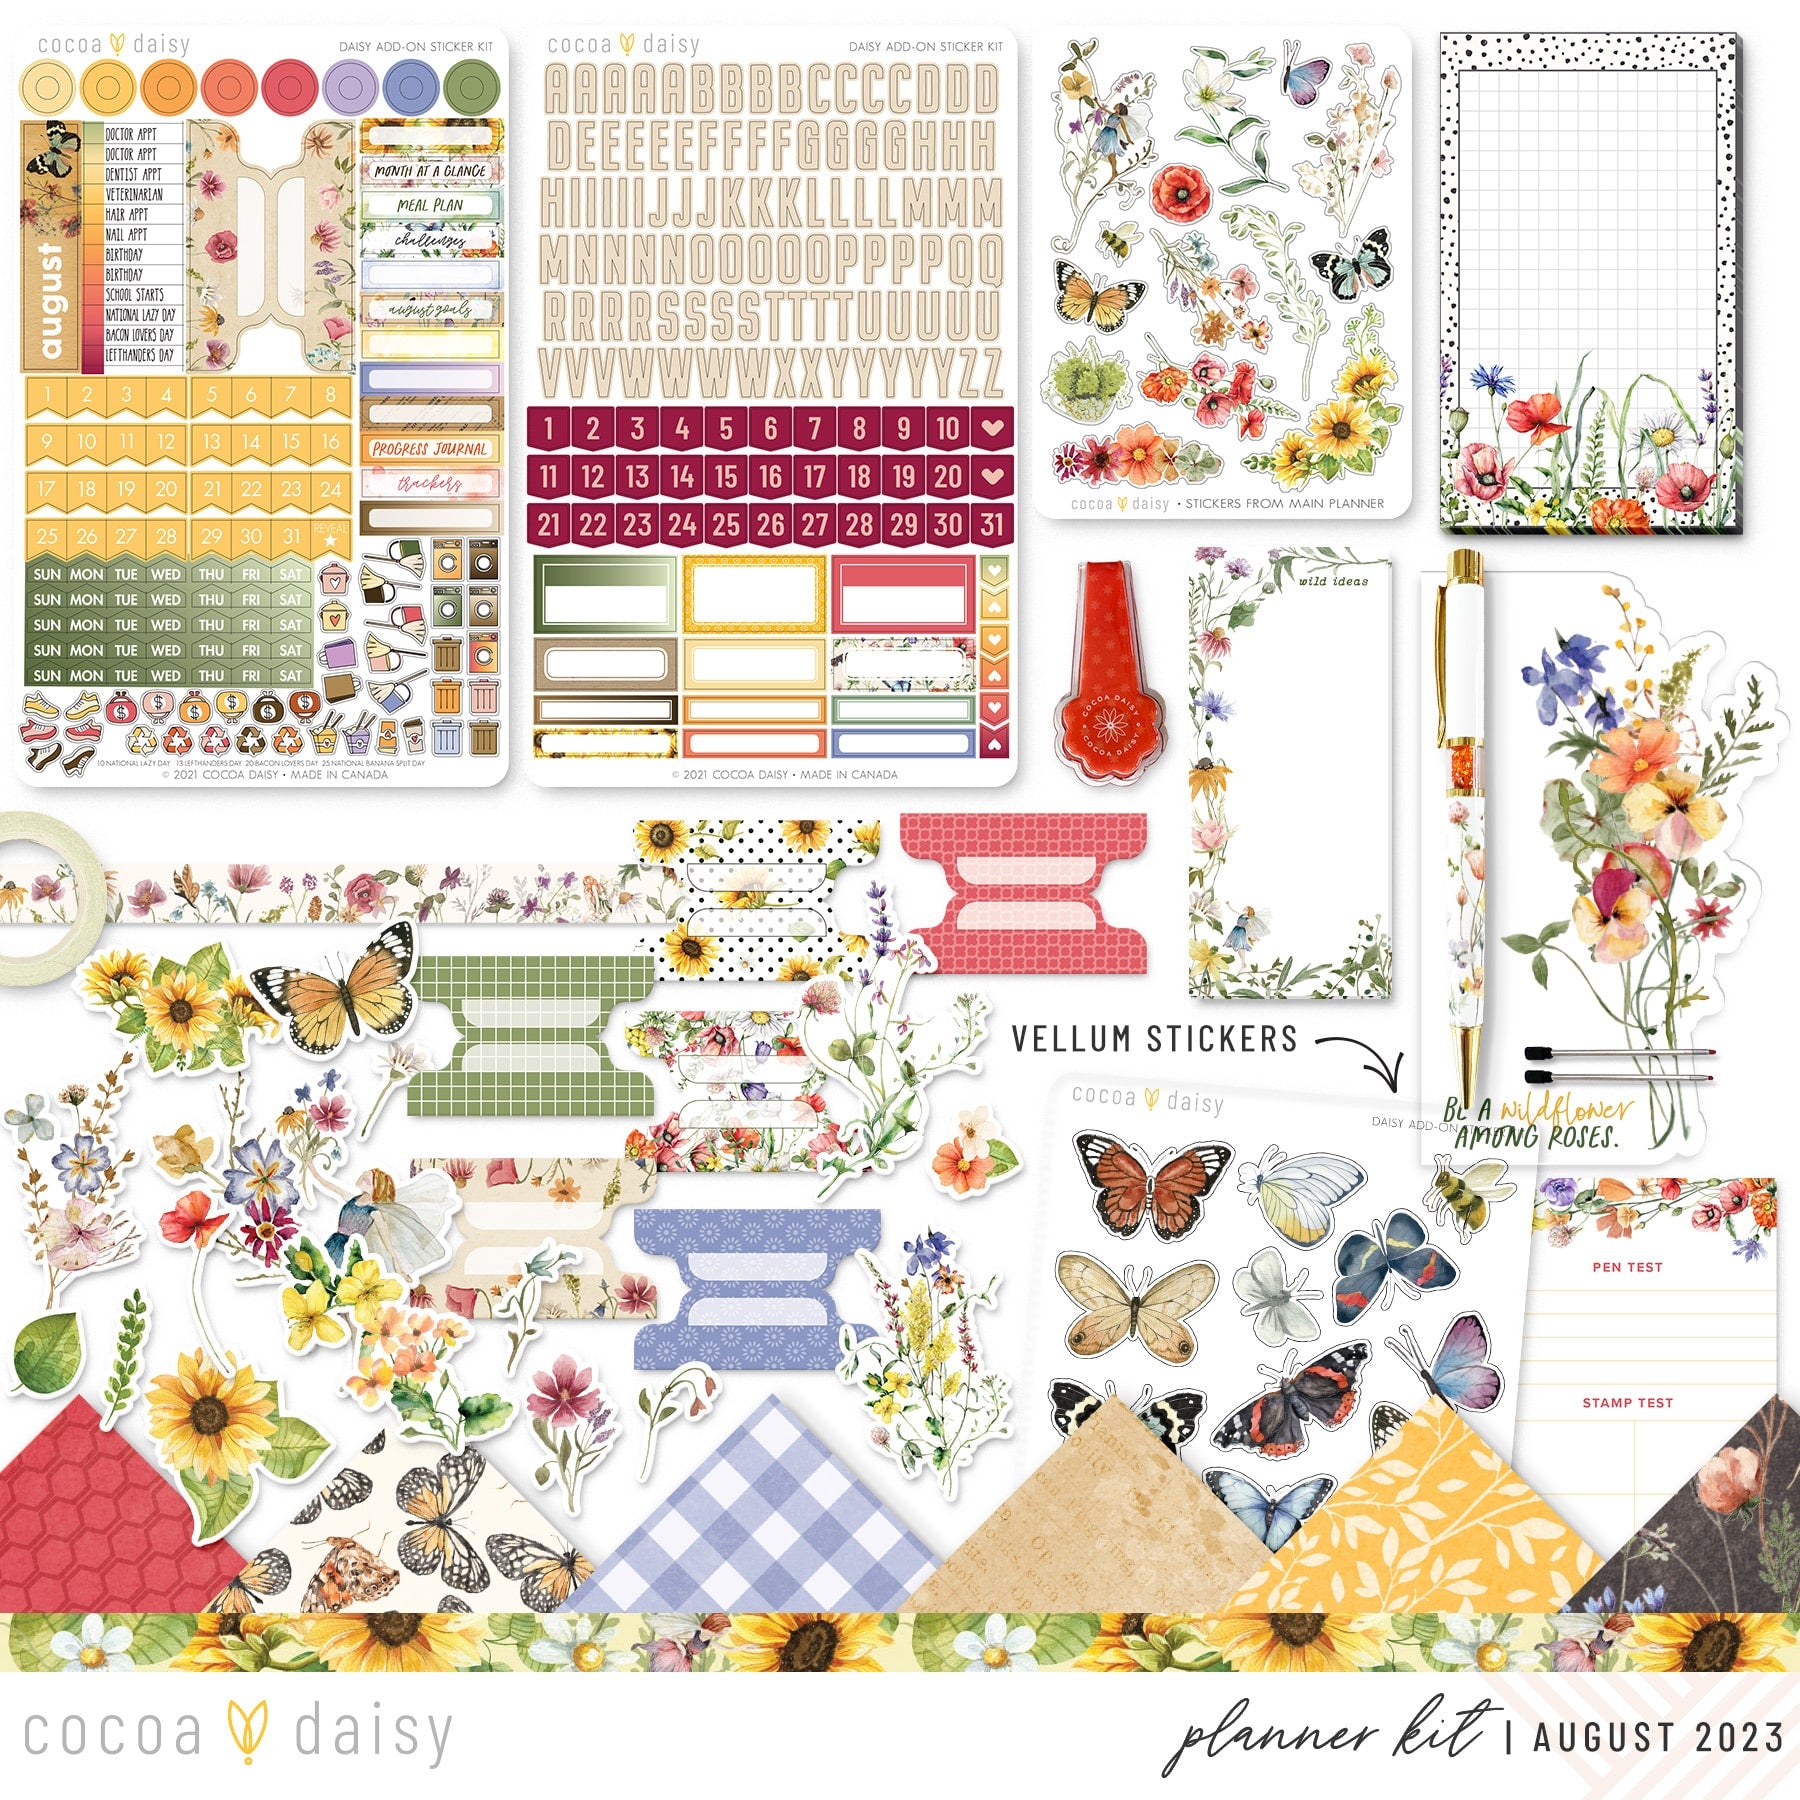 Quiet Meadow Planner Kit - Choose Your Insert August 2023